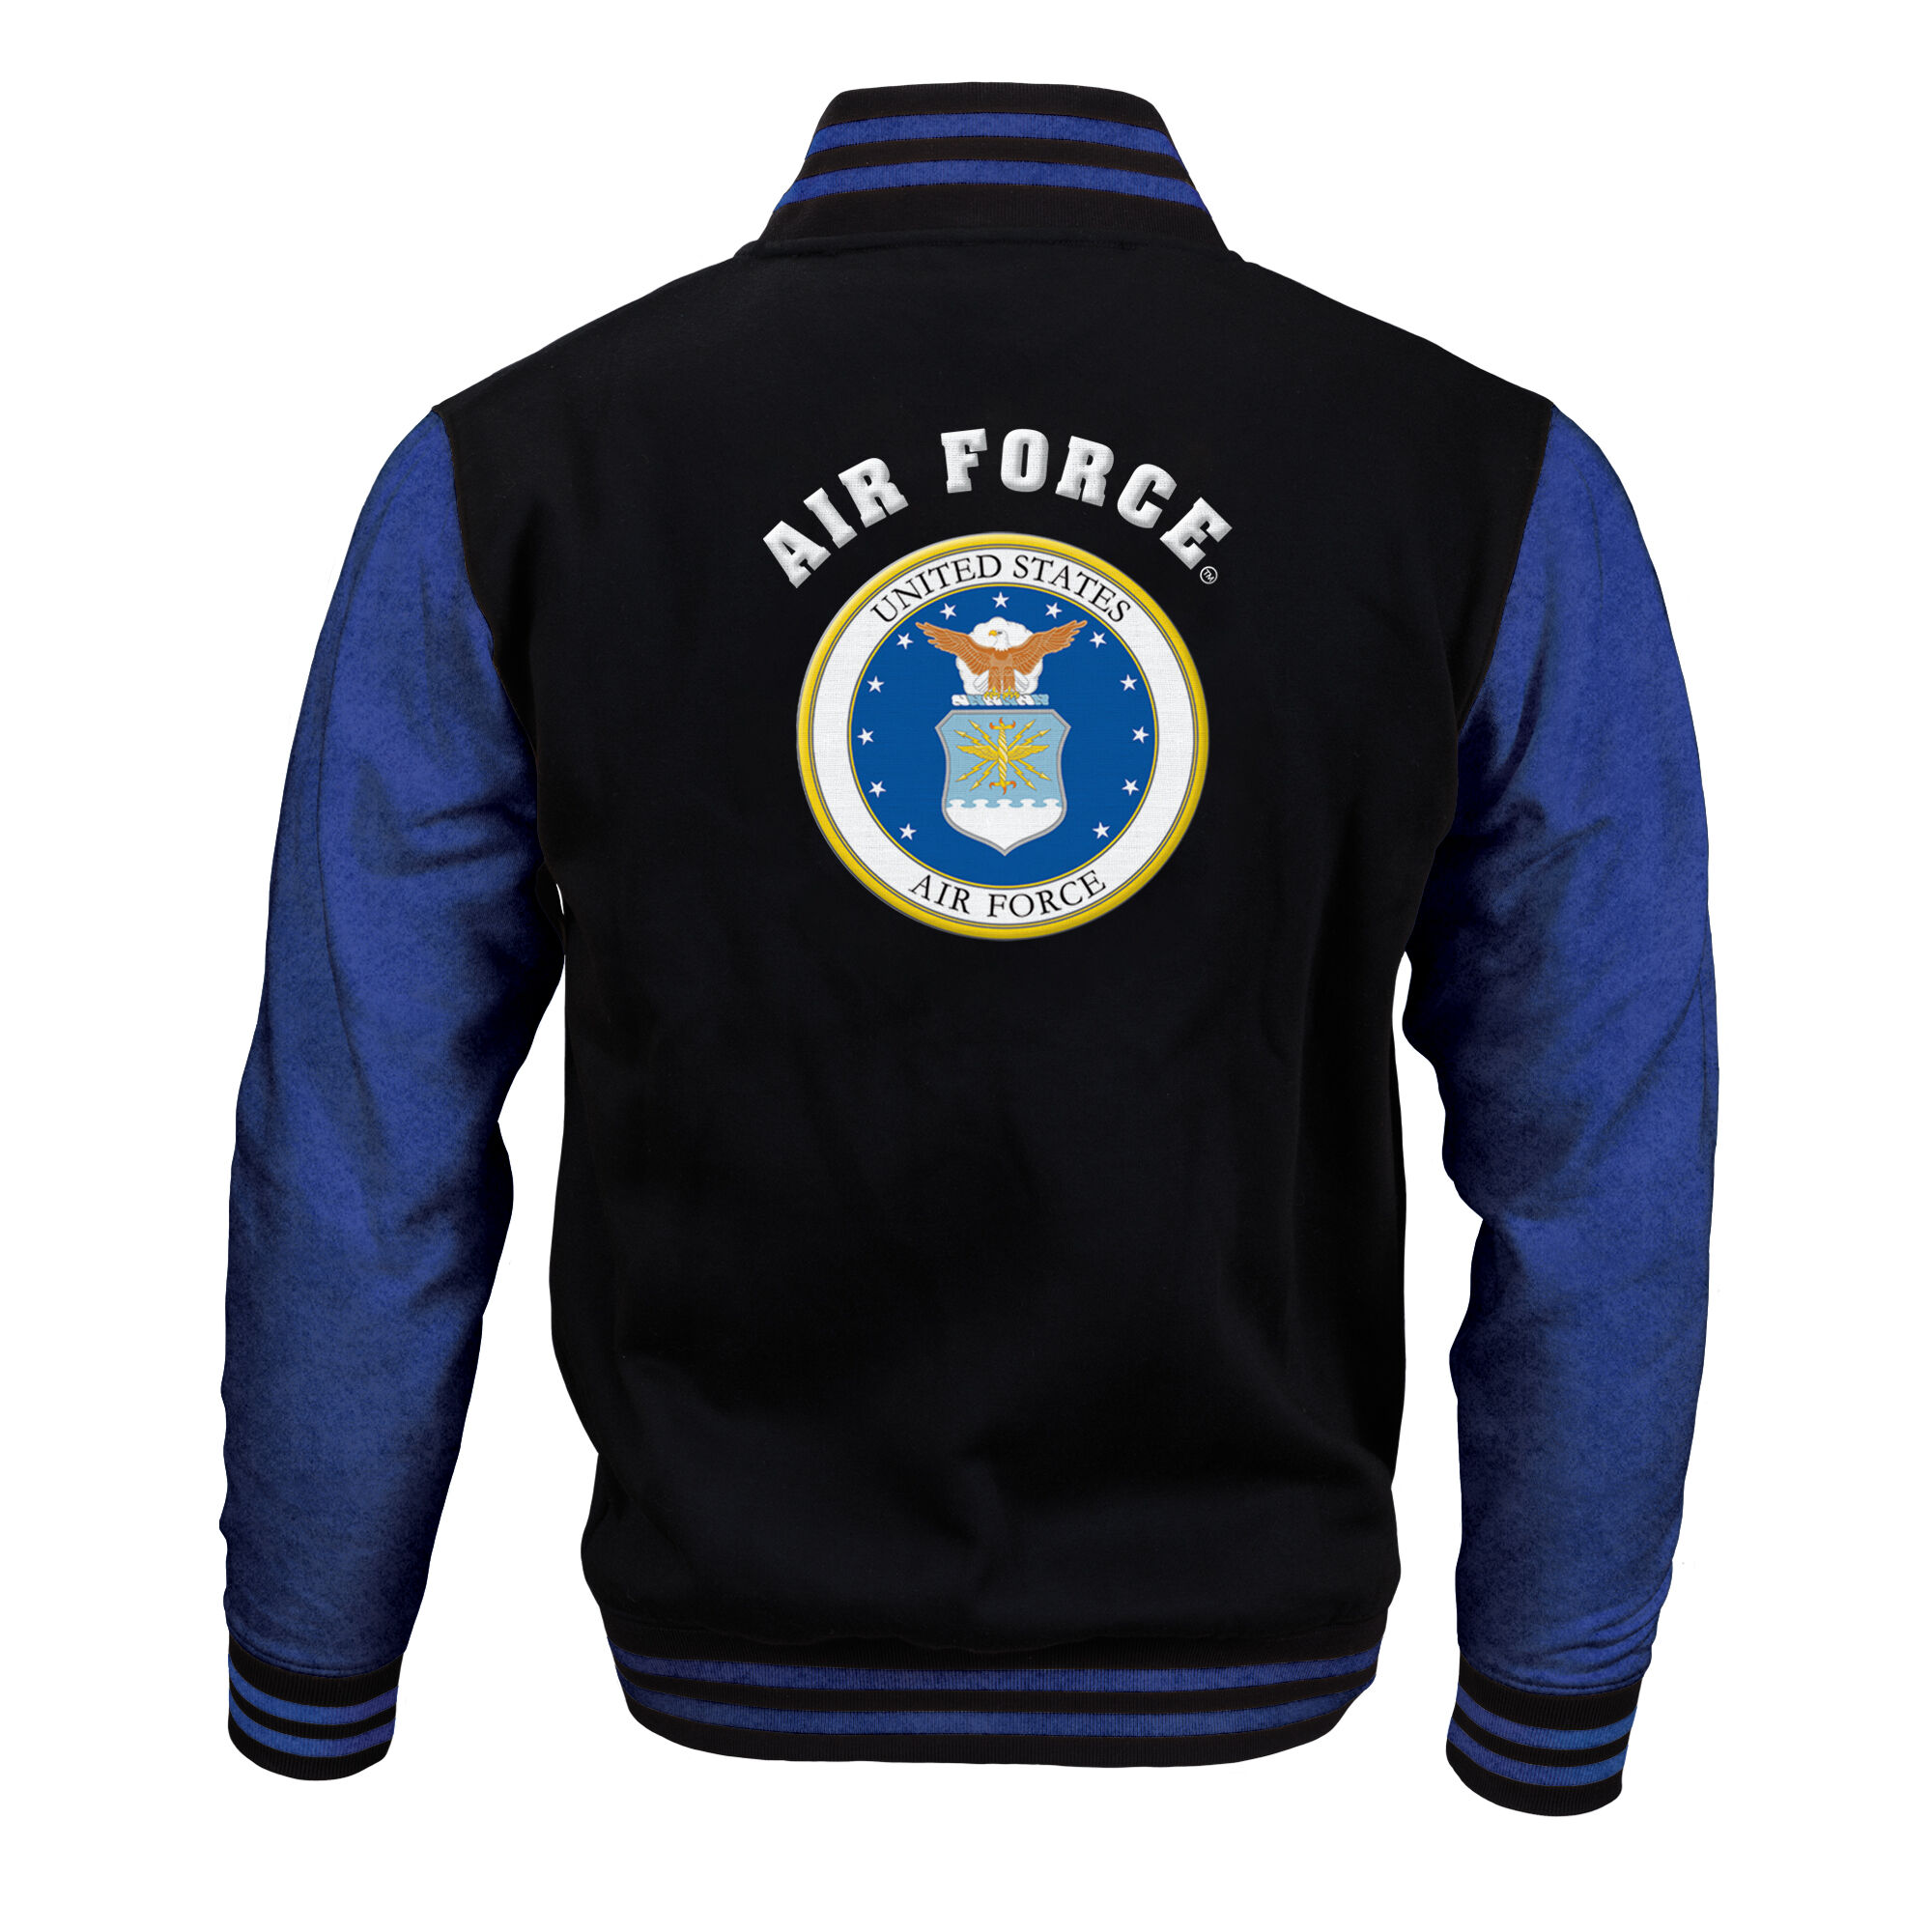 The Personalized US Air Force Varsity Jacket 10263 0035 b back